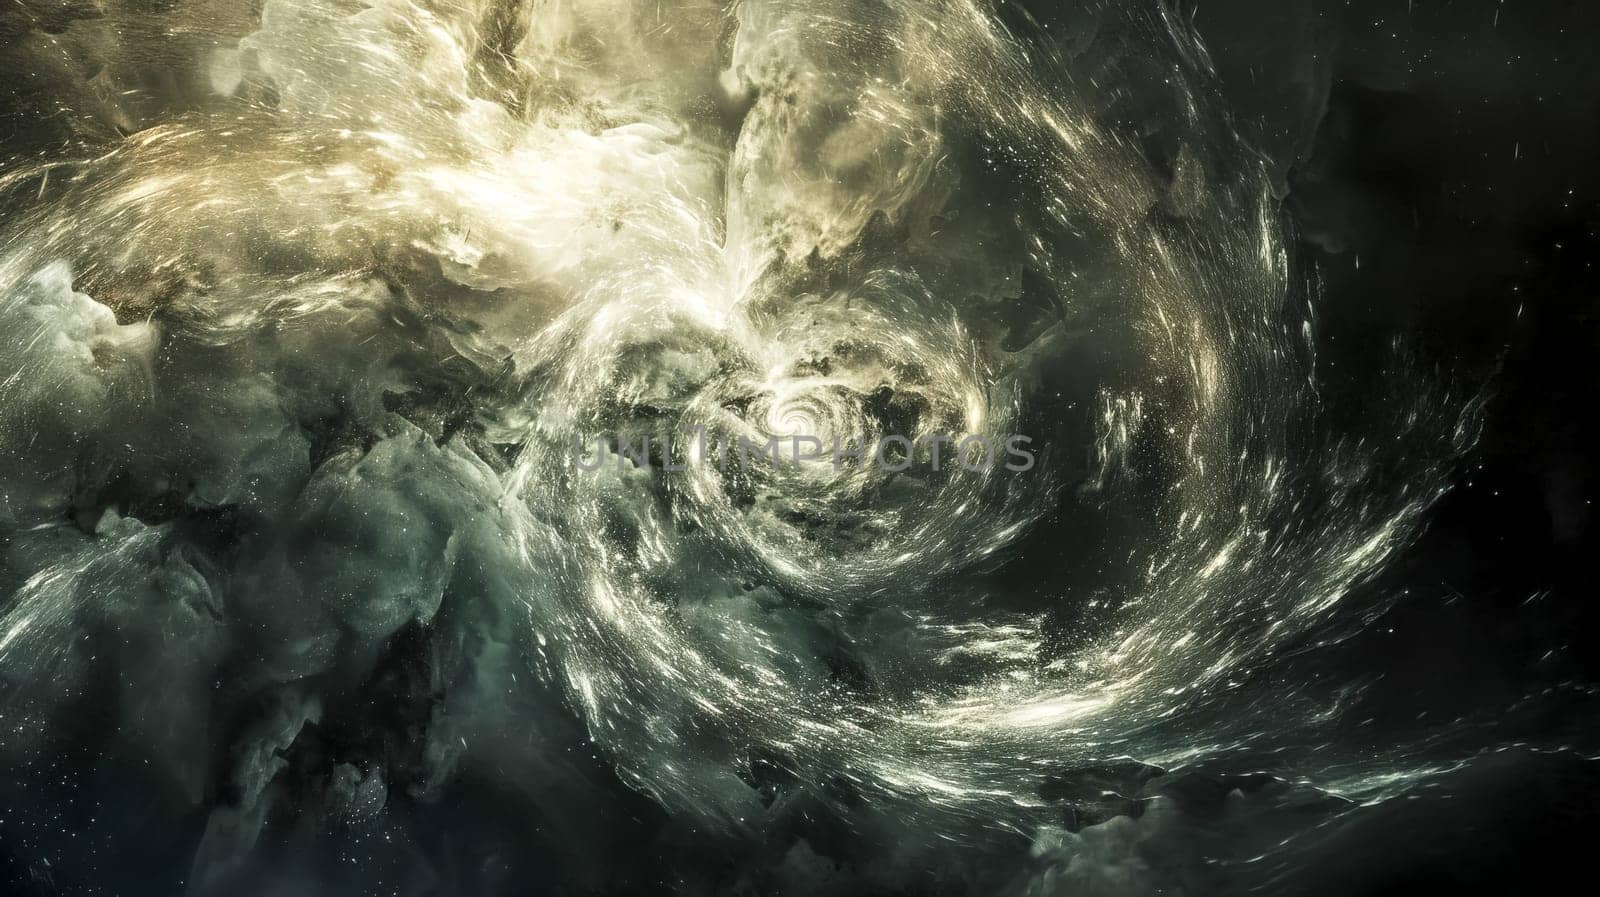 Abstract image evoking a dynamic cosmic scene with swirling patterns by Edophoto